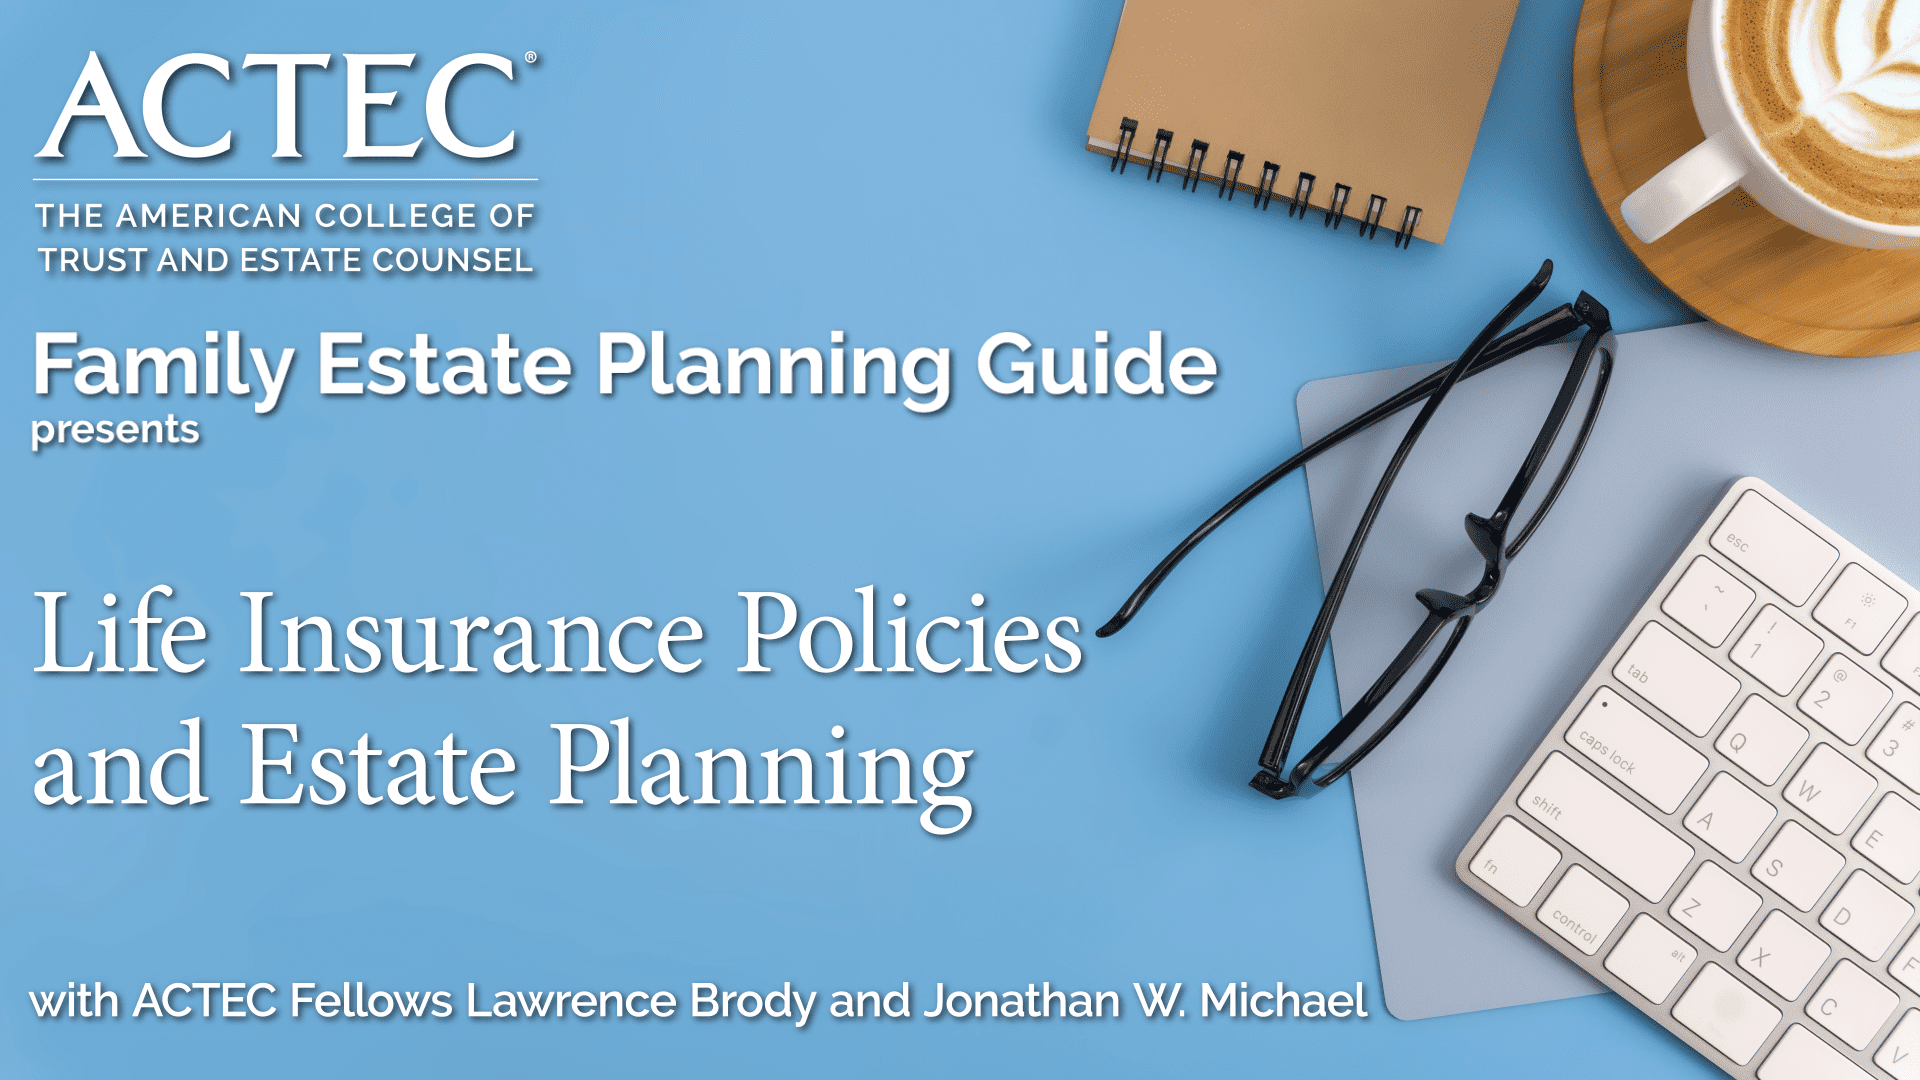 Life Insurance Policies and Estate Planning